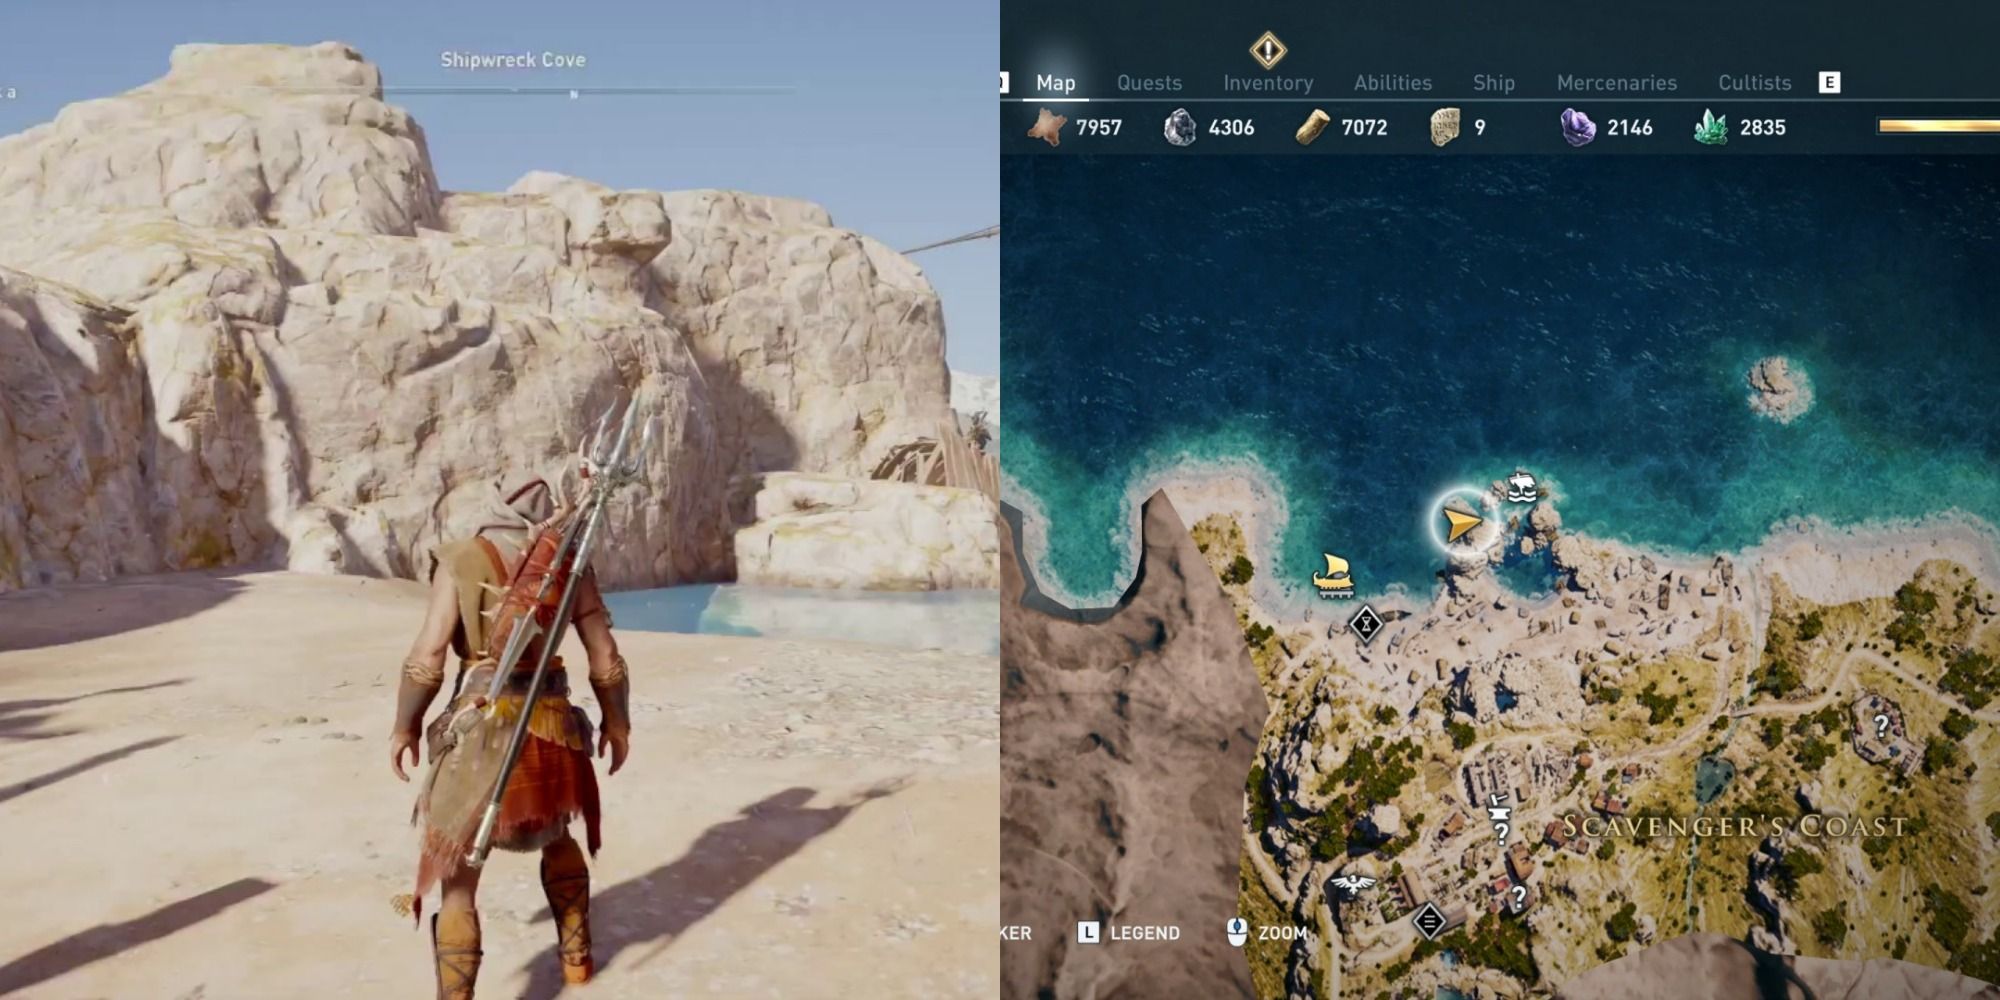 se Gendanne idiom Assassin's Creed Odyssey: How To Find The Cultist Clue In Shipwreck Cove